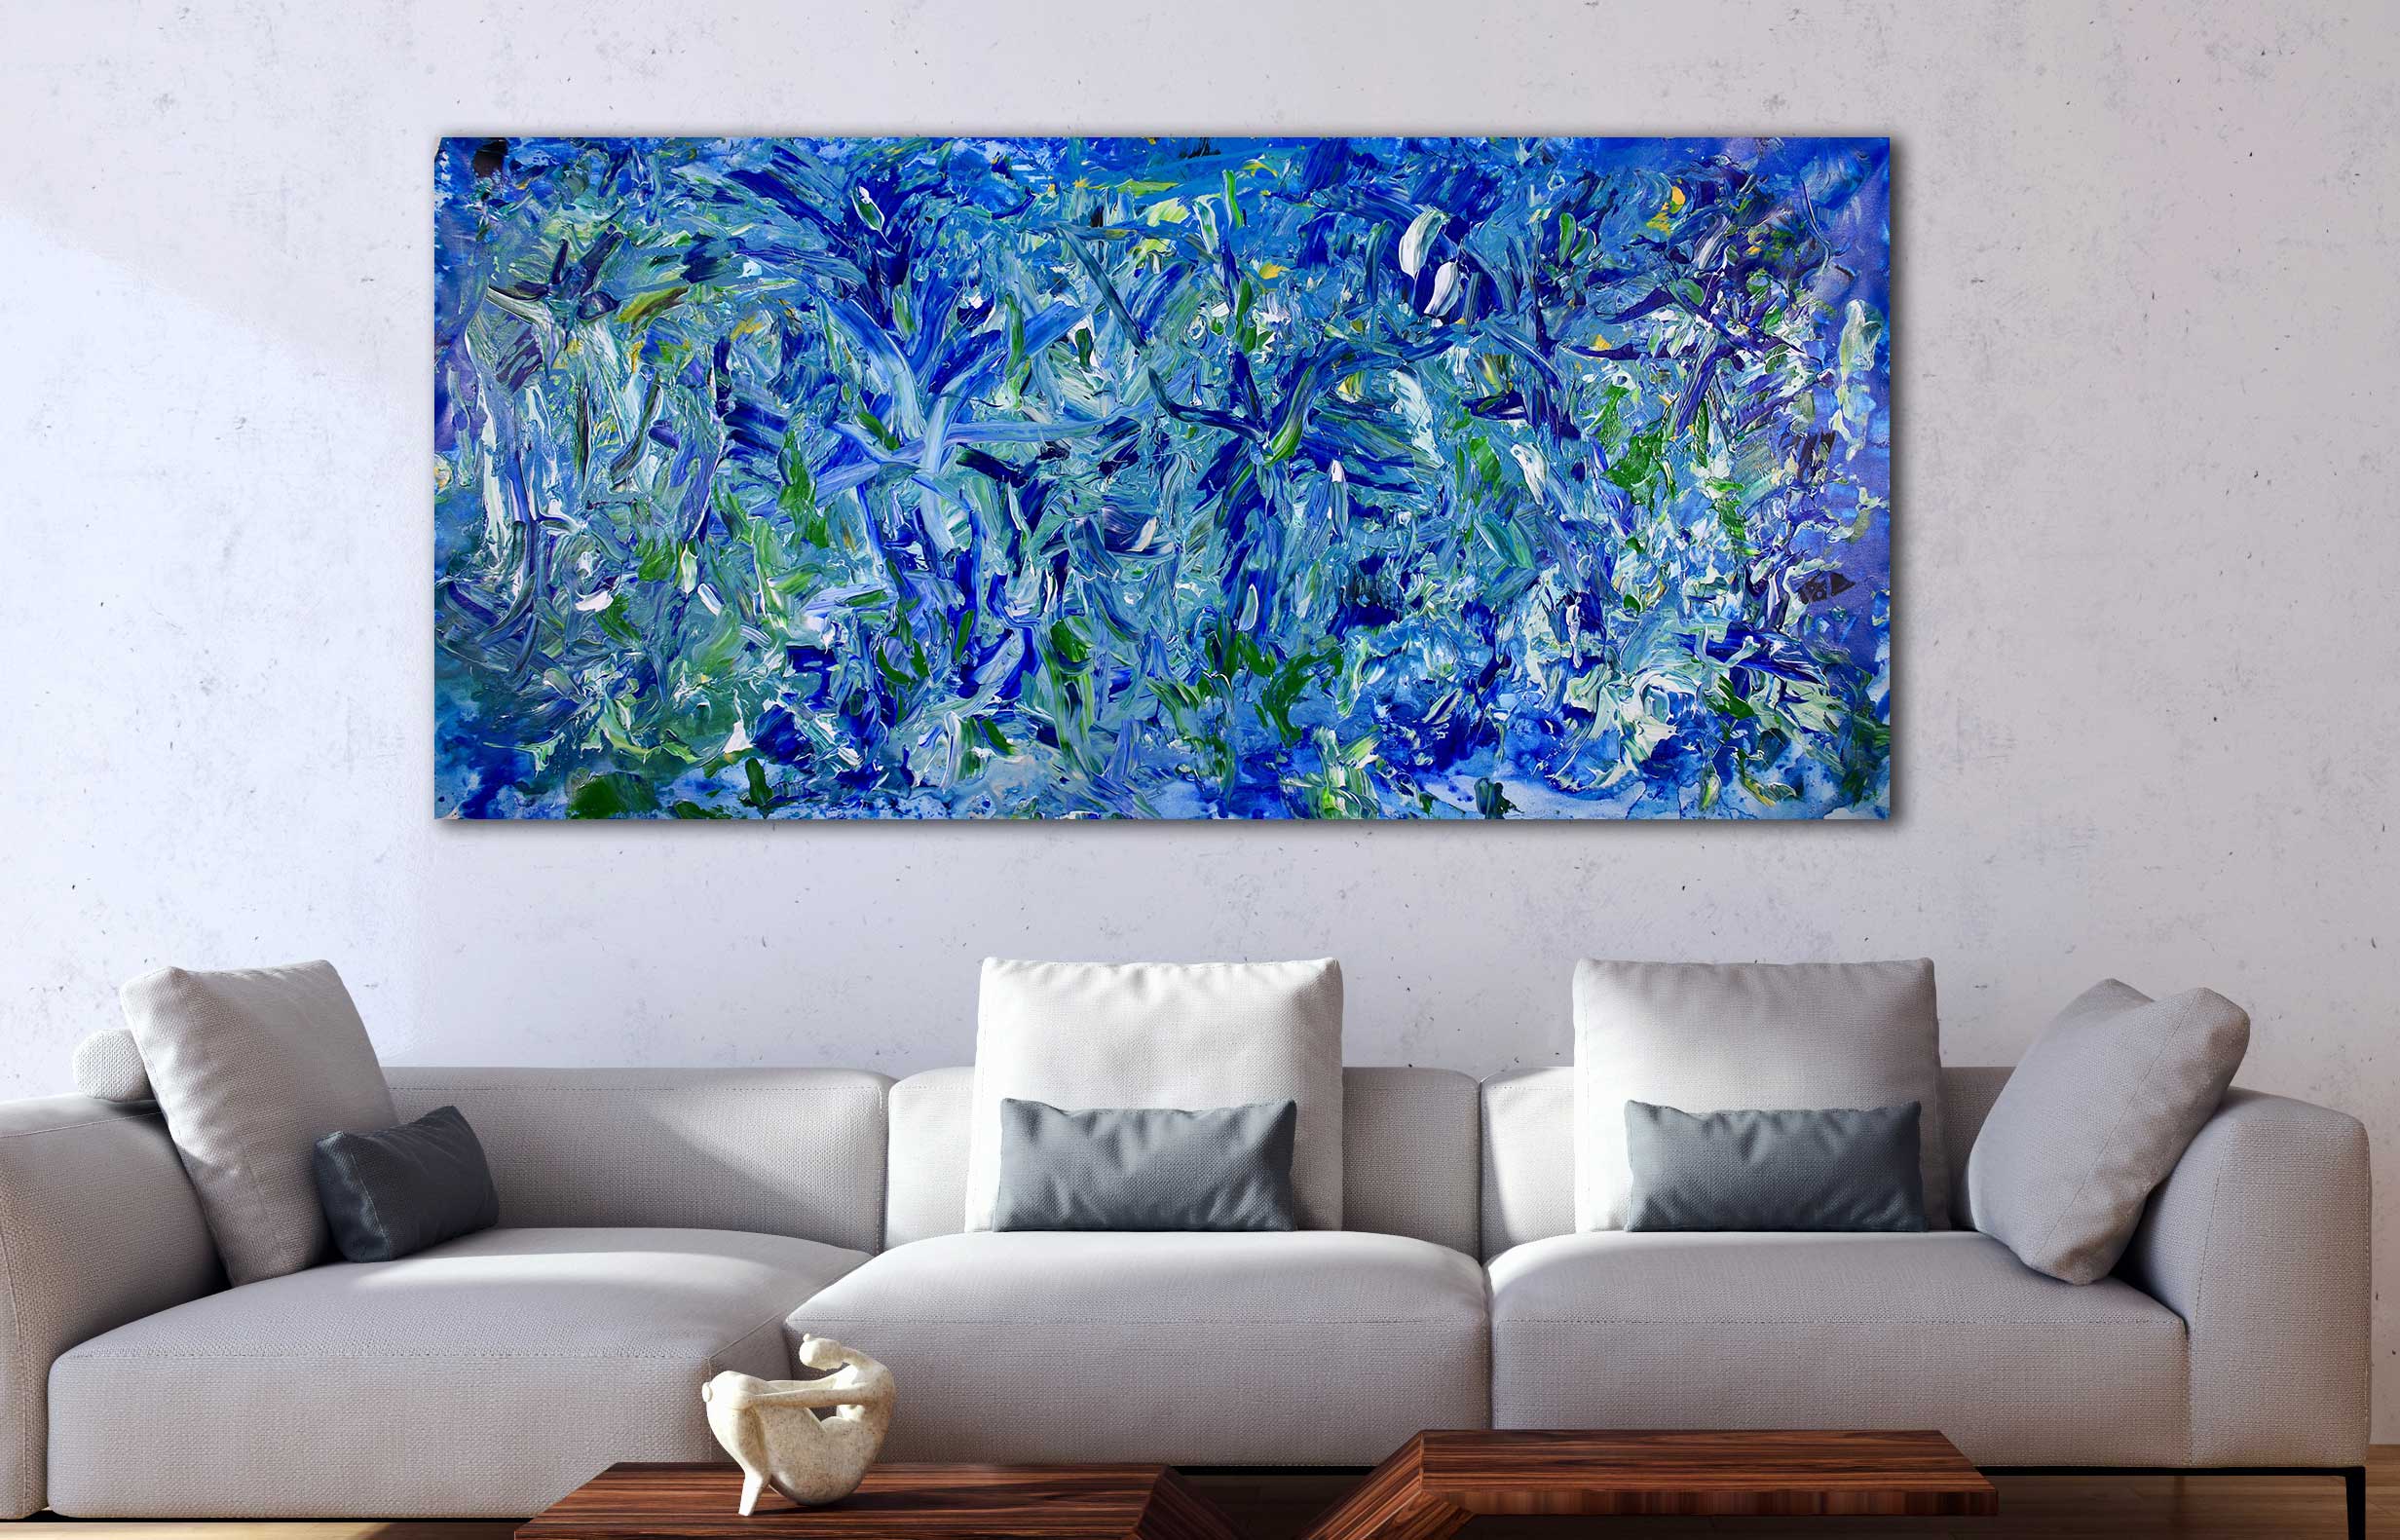 SOLD - Forest In Blue by Nestor Toro